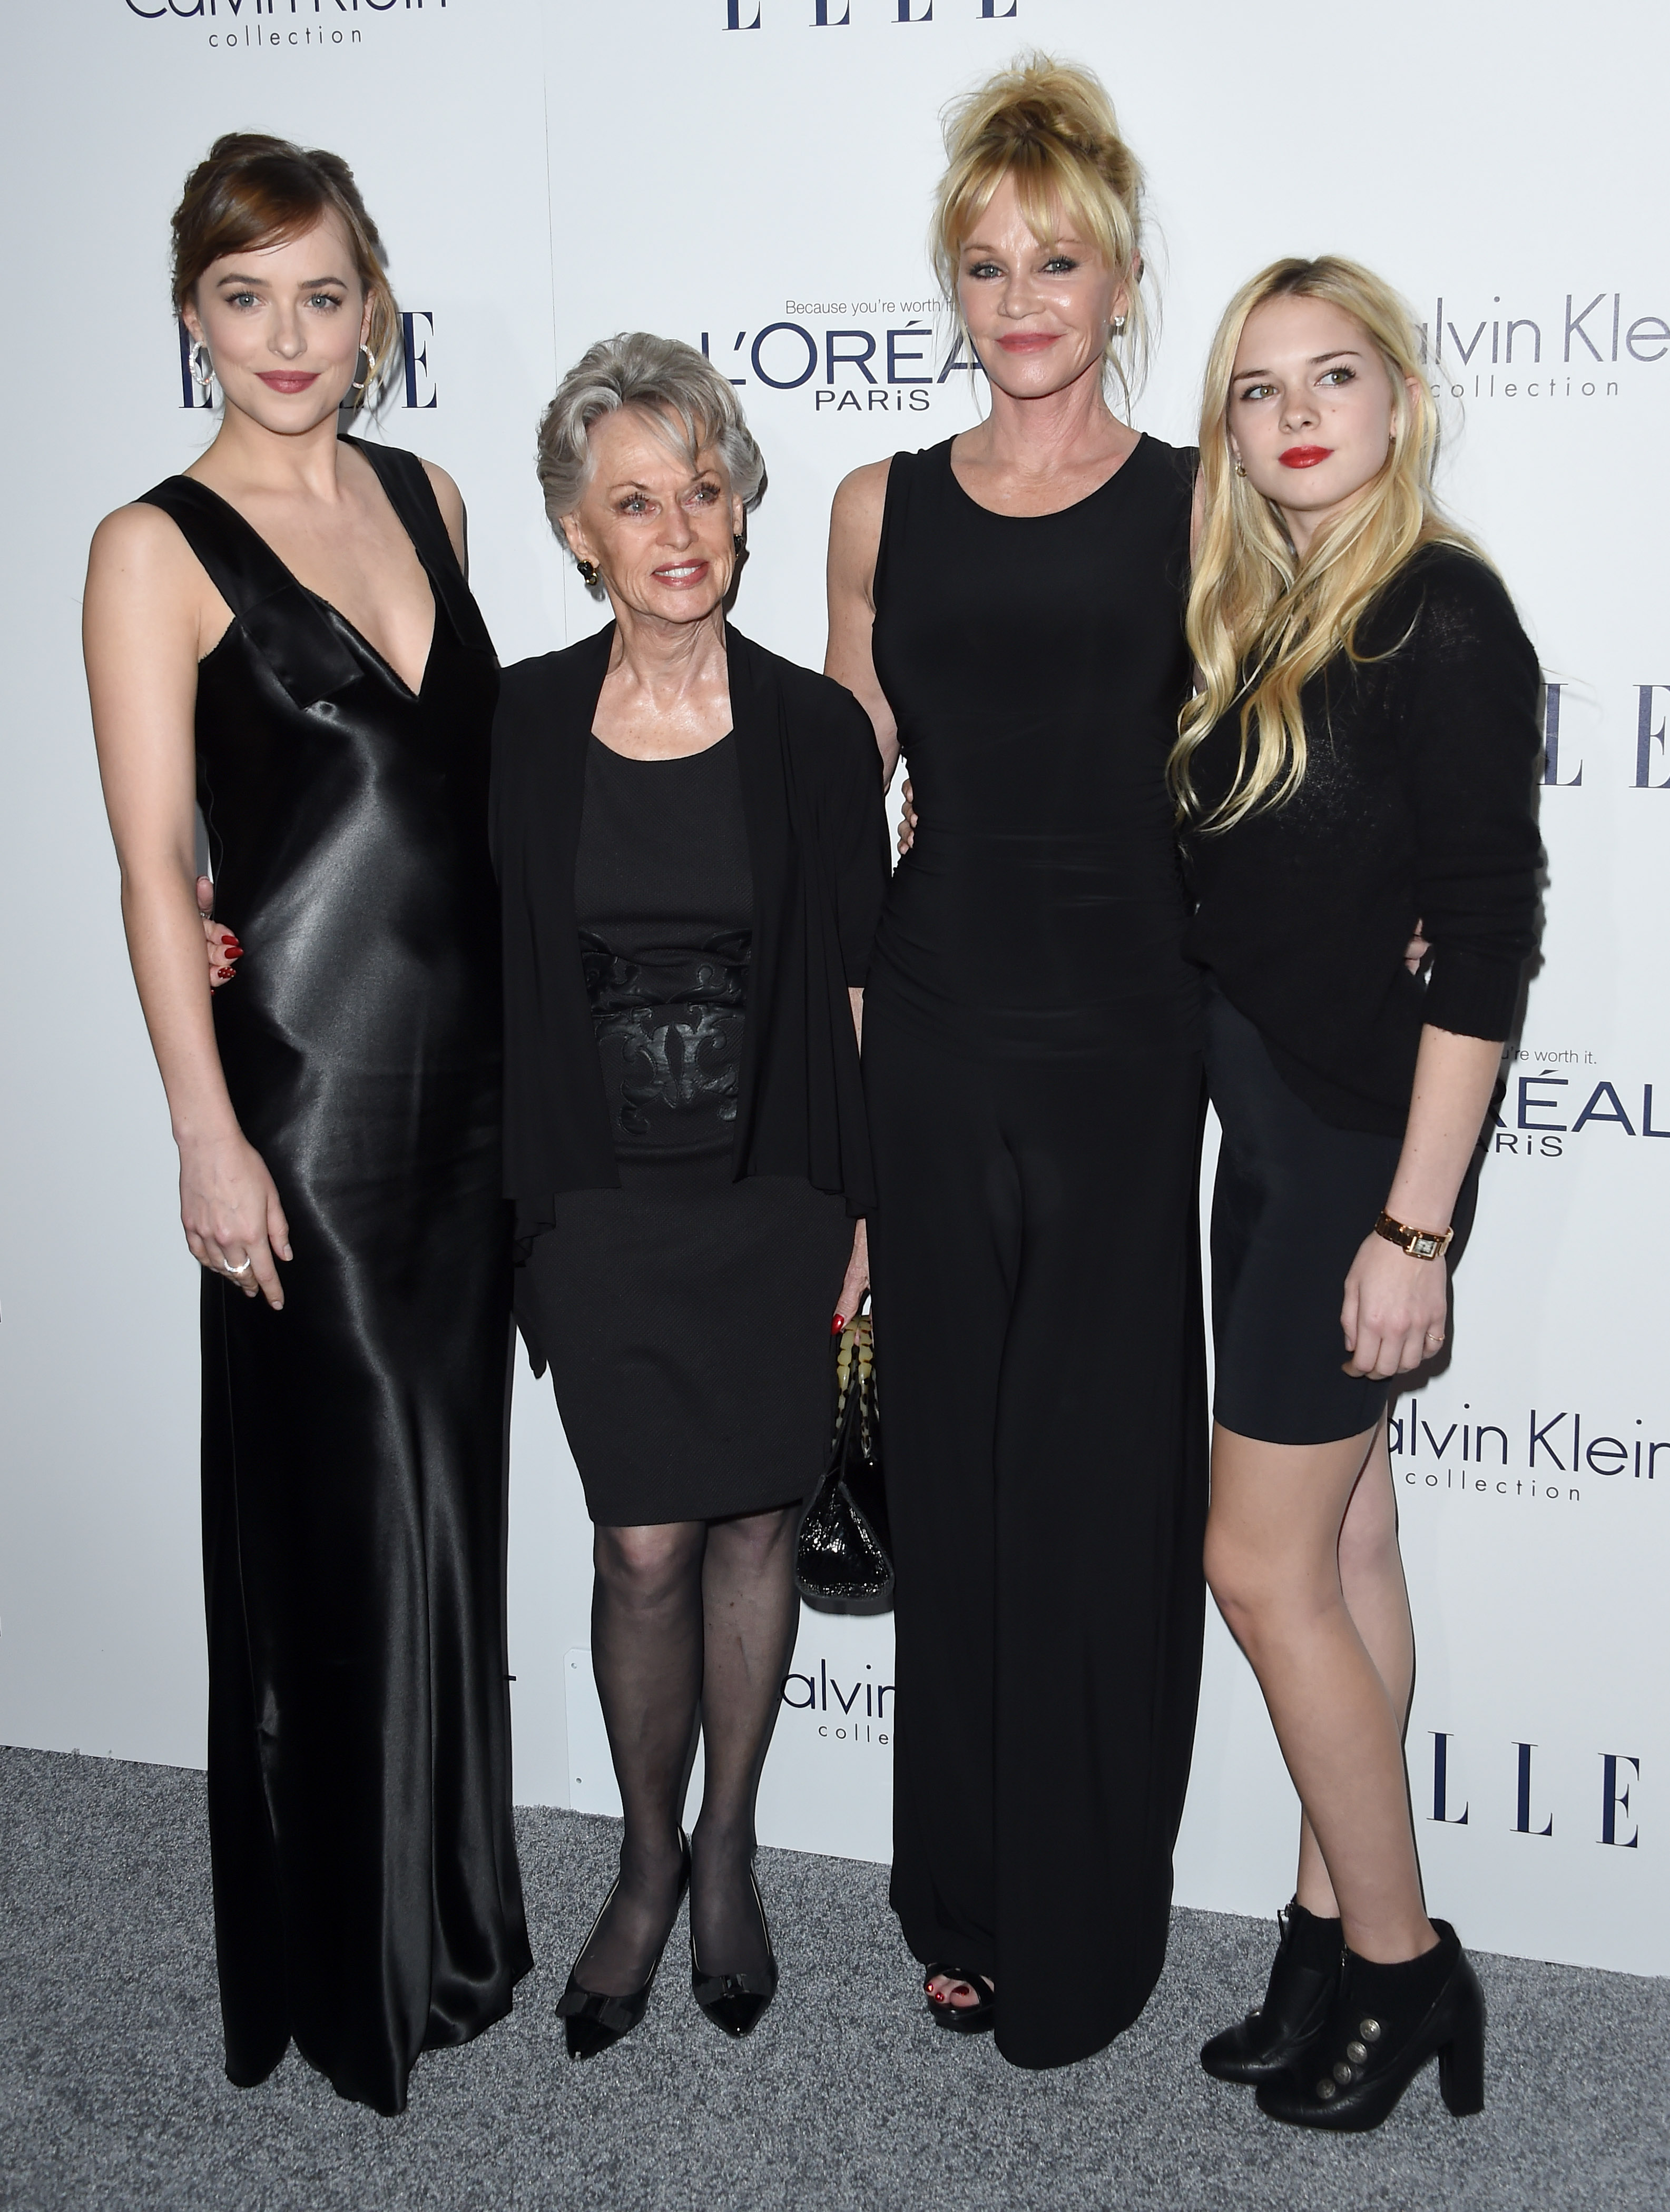 Dakota Johnson, Tippi Hedren, Melanie Griffith and Stella Banderas at the 22nd Annual Elle Women In Hollywood Awards in Los Angeles, California on October 19, 2015 | Source: Getty Images